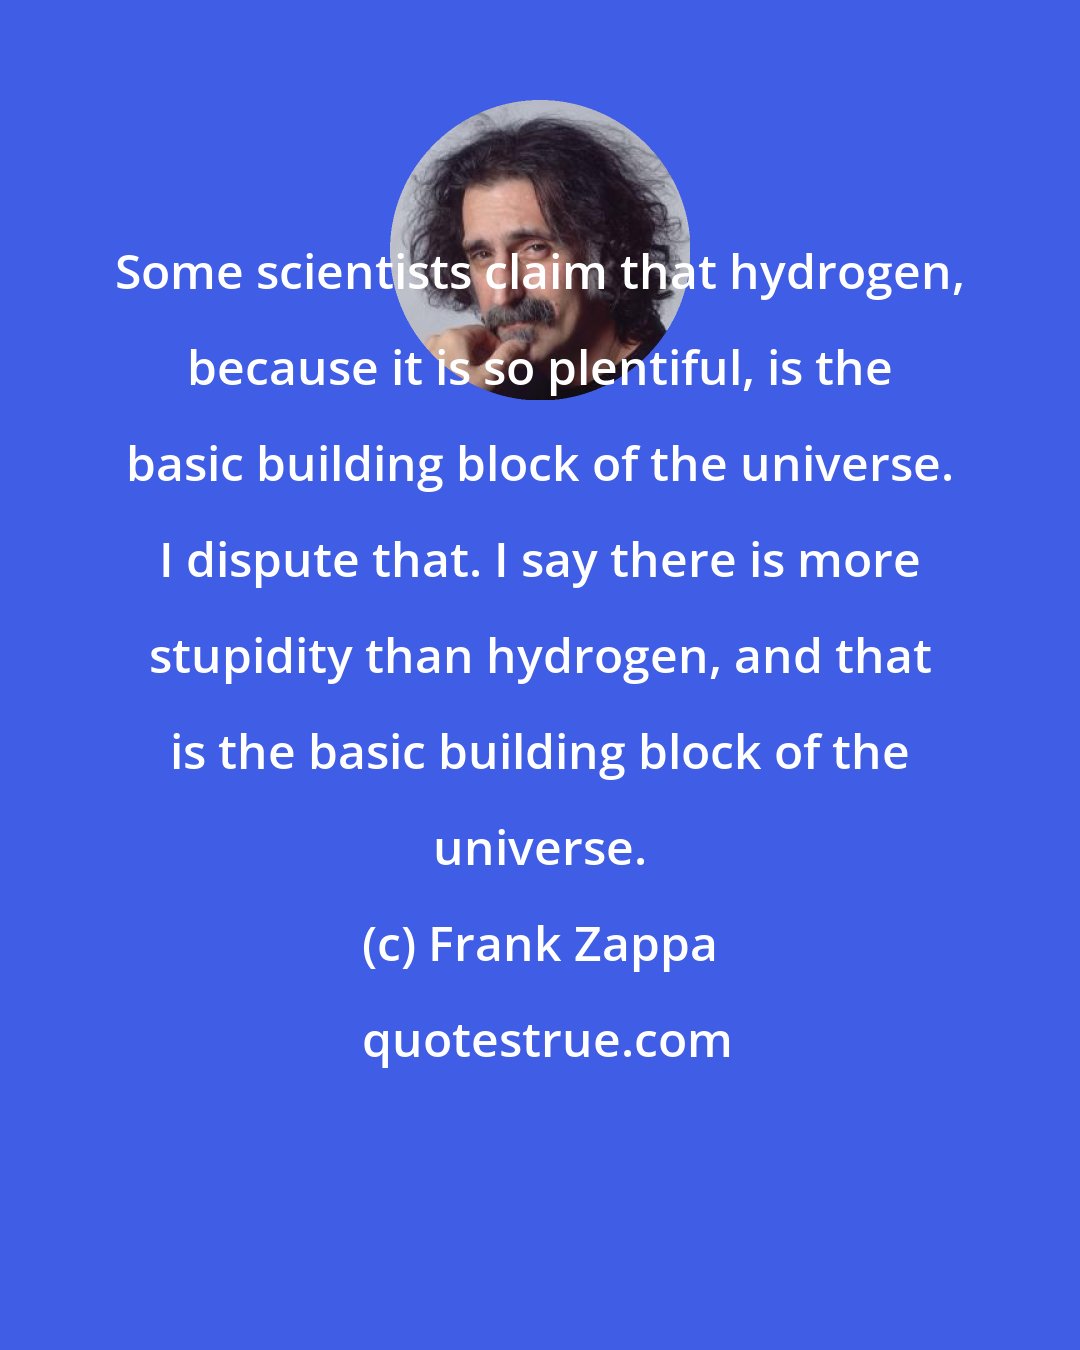 Frank Zappa: Some scientists claim that hydrogen, because it is so plentiful, is the basic building block of the universe. I dispute that. I say there is more stupidity than hydrogen, and that is the basic building block of the universe.